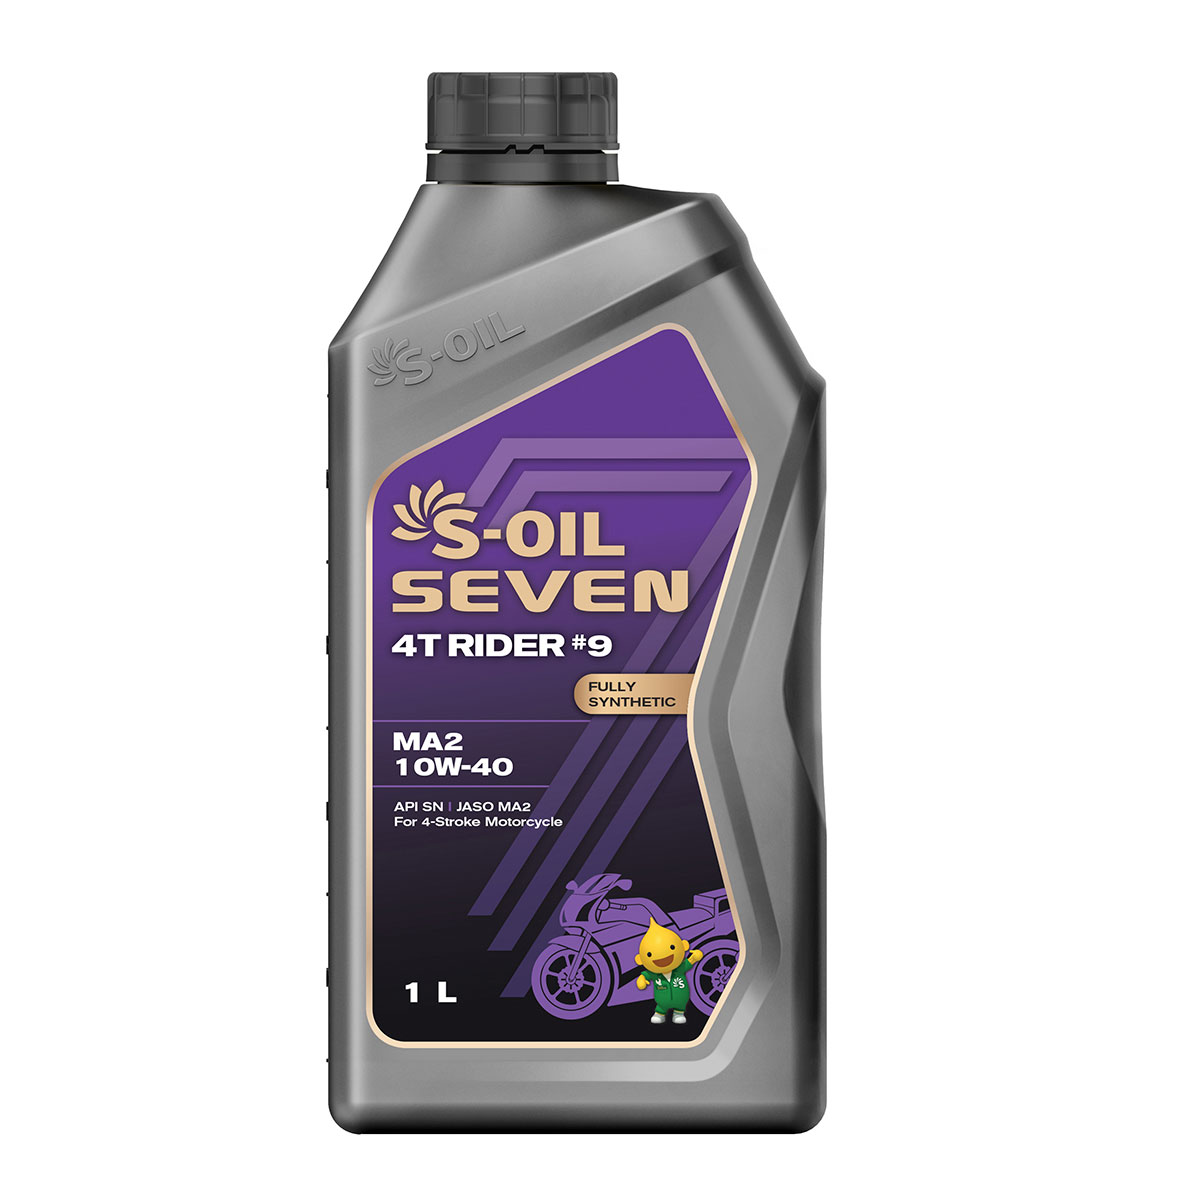 S-OIL  7   4T RIDER 9  SN/MA2  10W40 (1л), Fully Synthetic (1/12)